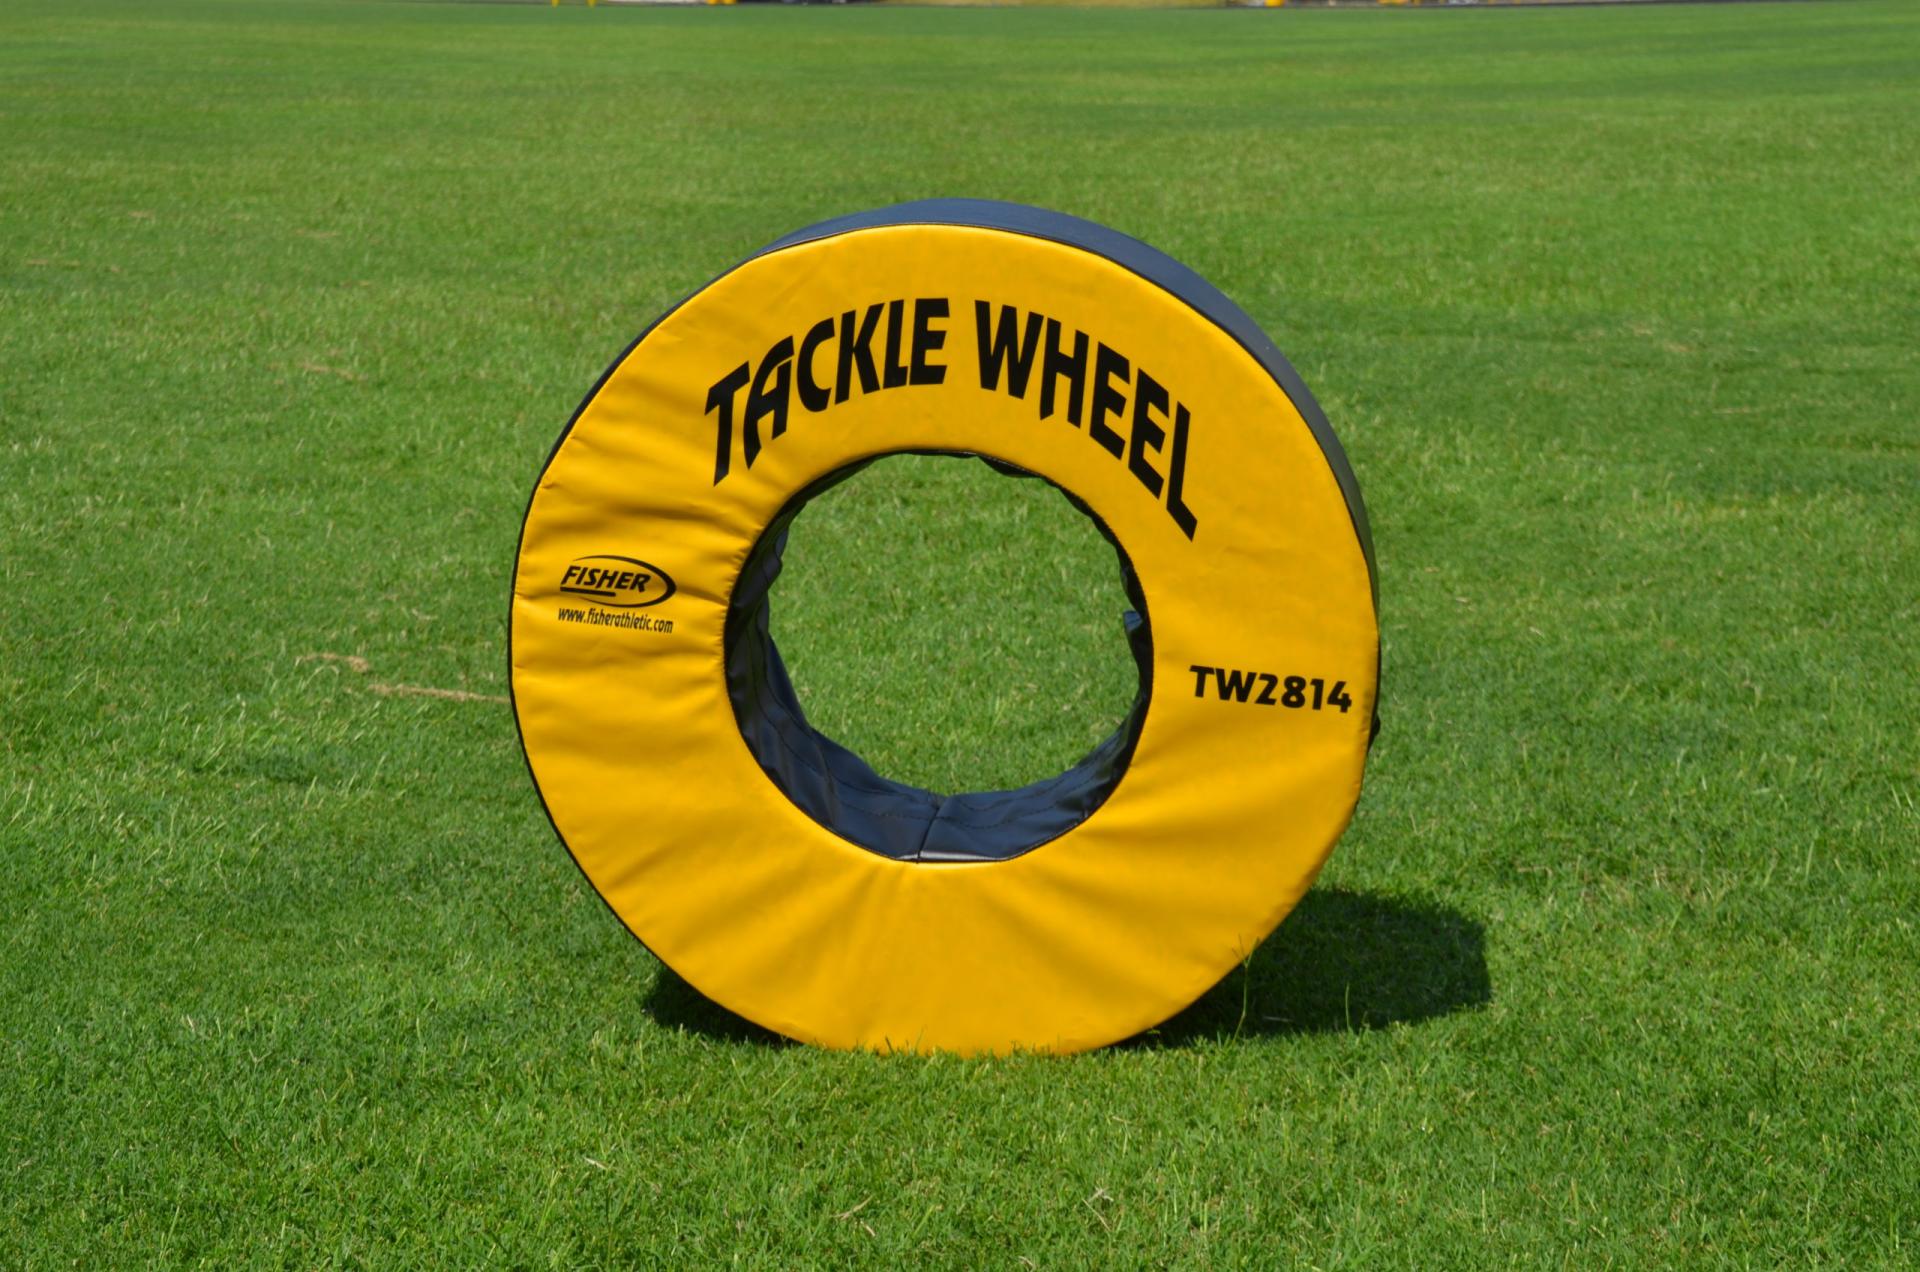 Fisher Tackle Wheel - 28 — Pro Sport Clothing Company - Grande